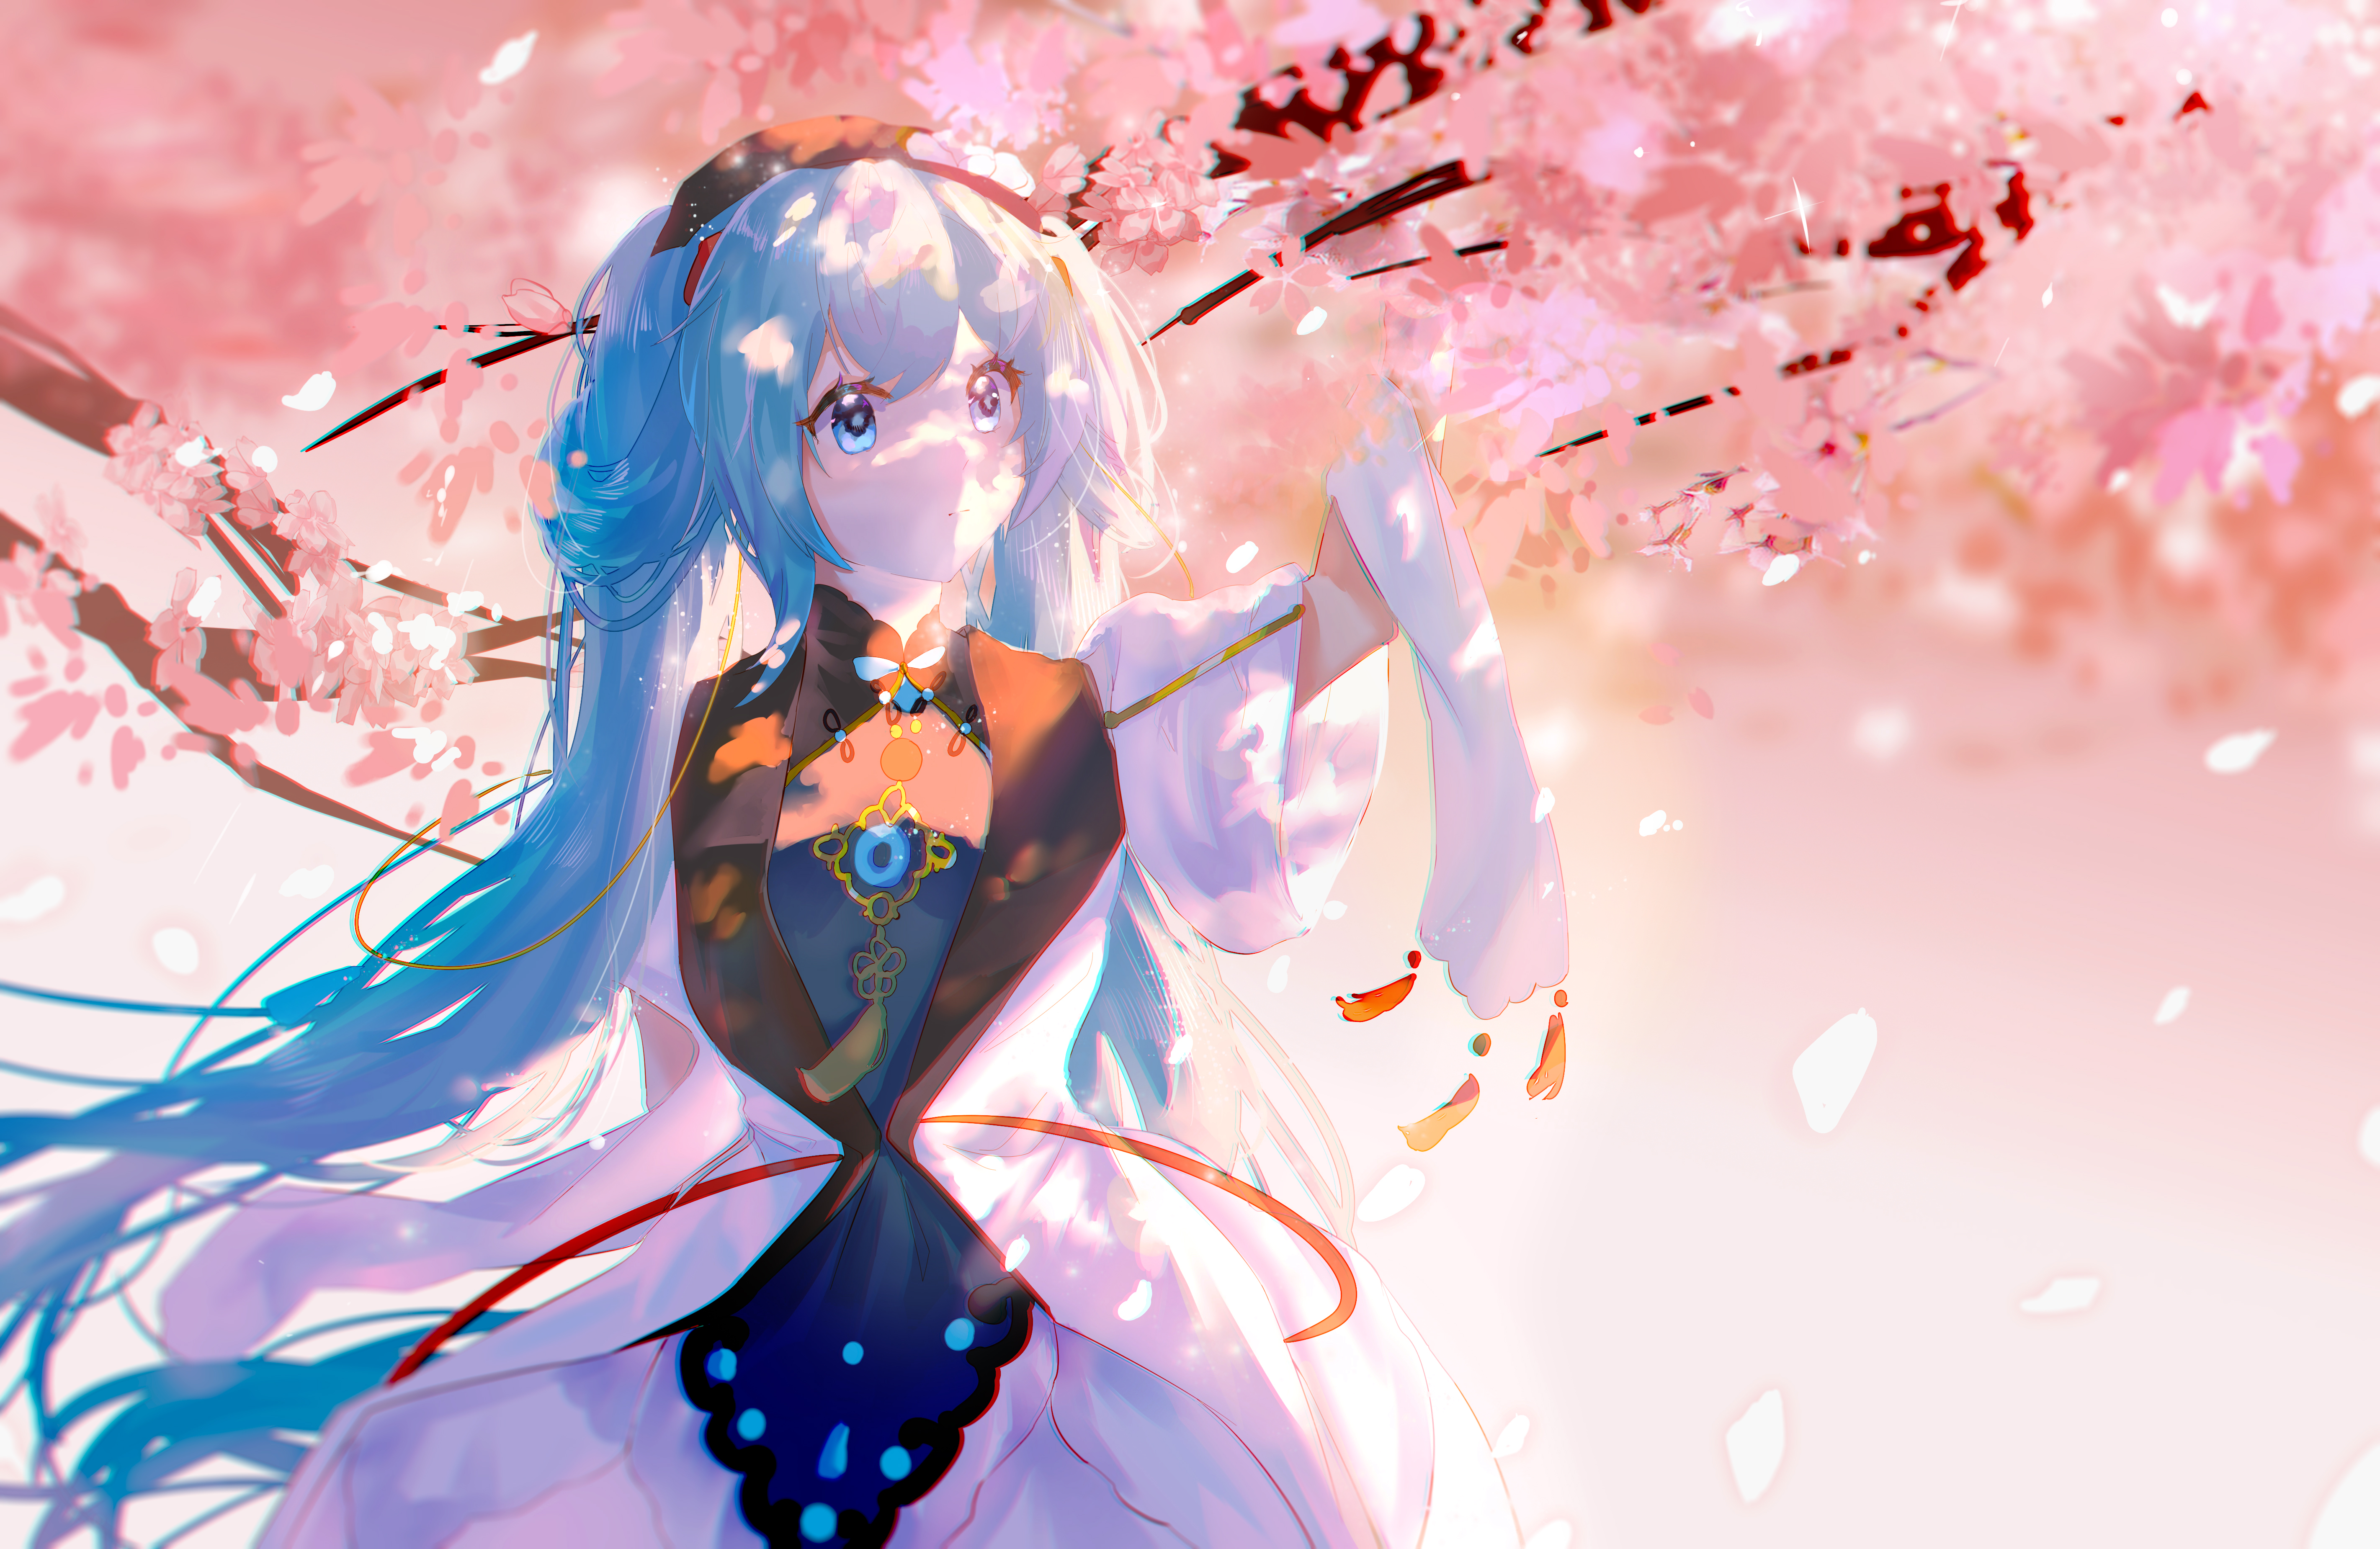 miku by leafseed